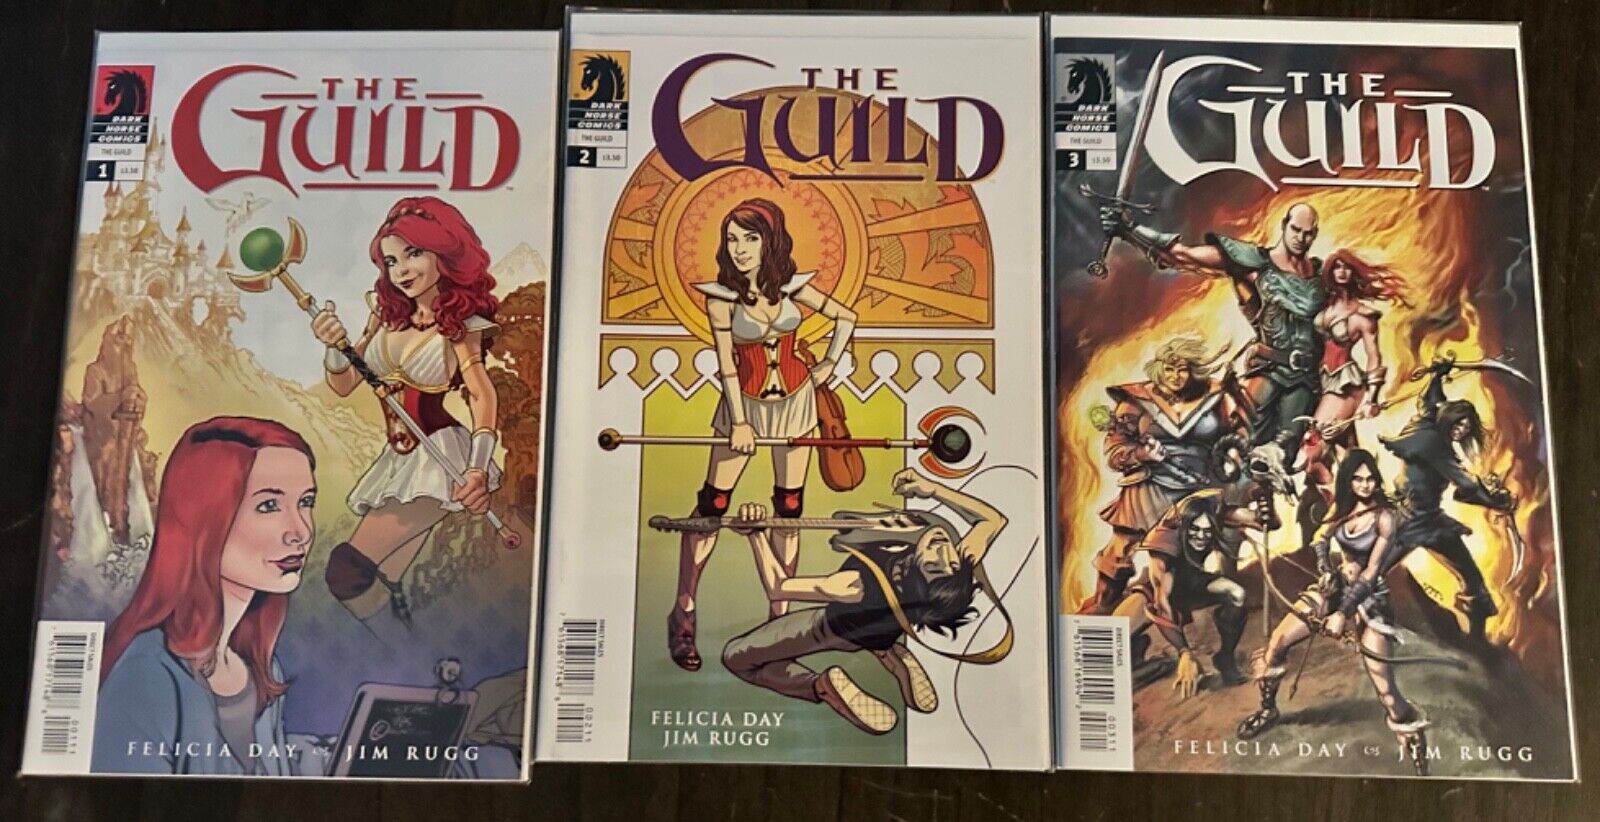 The Guild 1-3 - Felicia Day/Jim Rugg - Mint